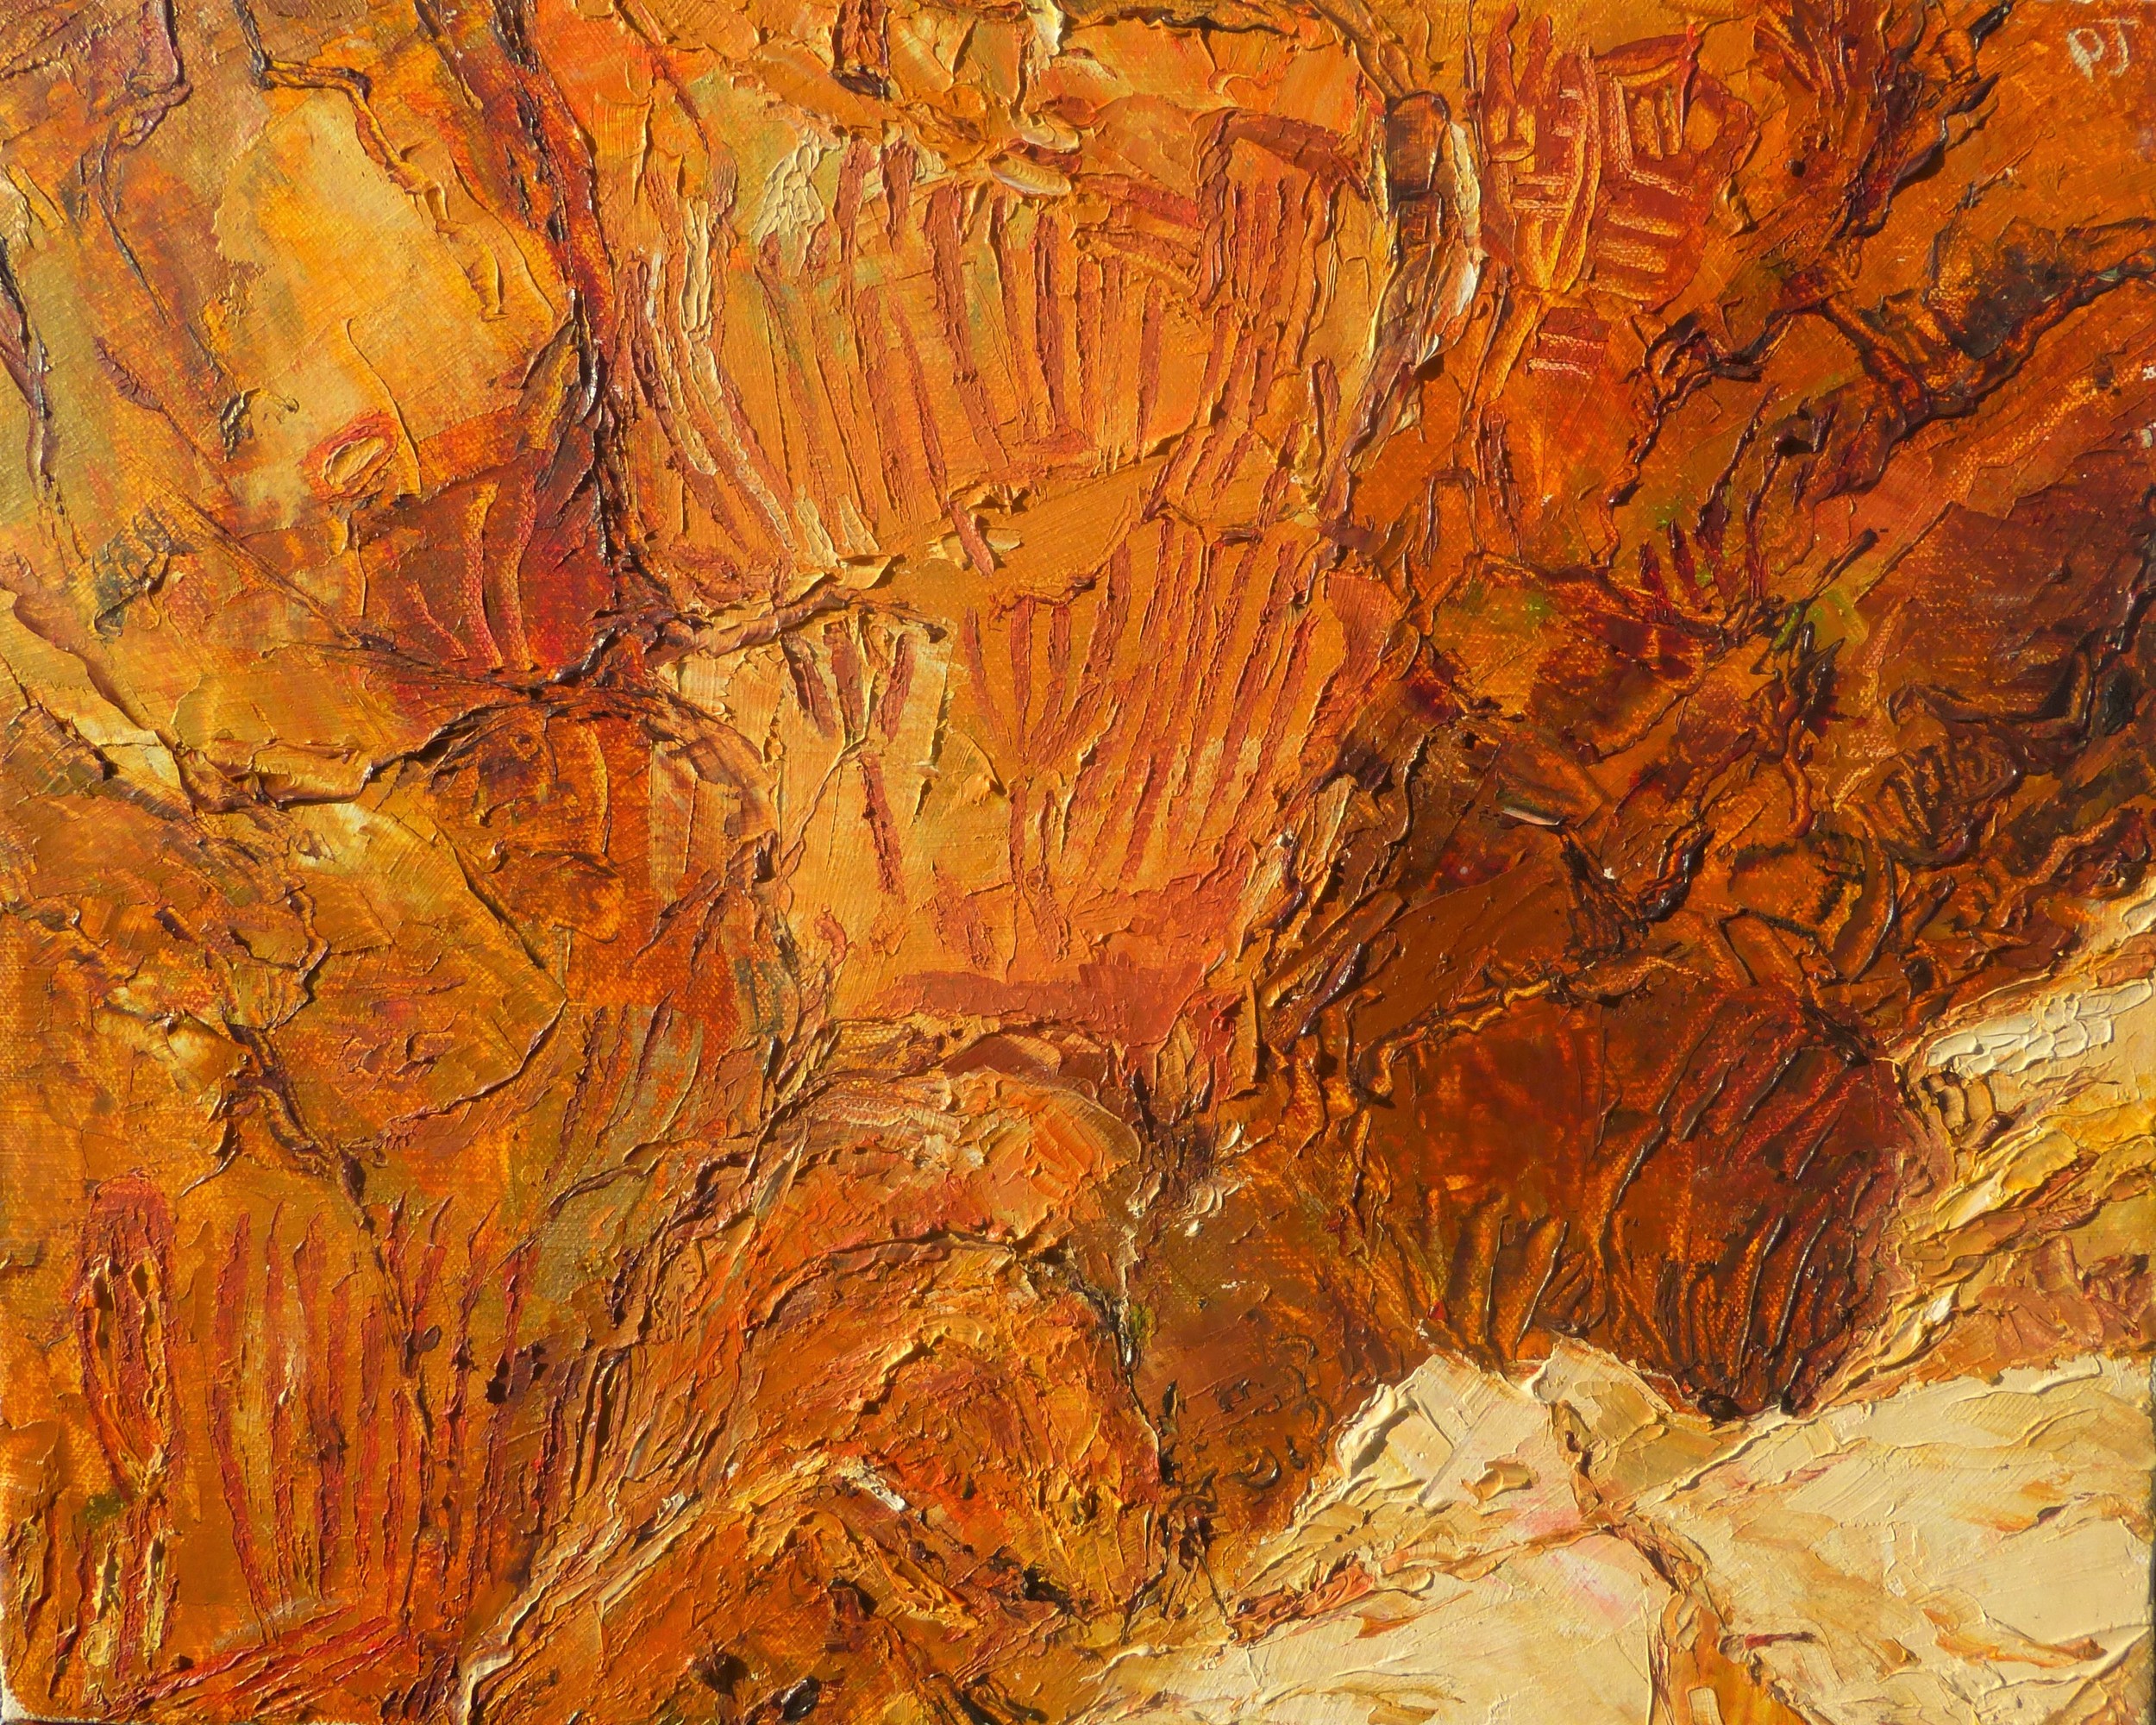 Aboriginal rock painting 2, oil on canvas 